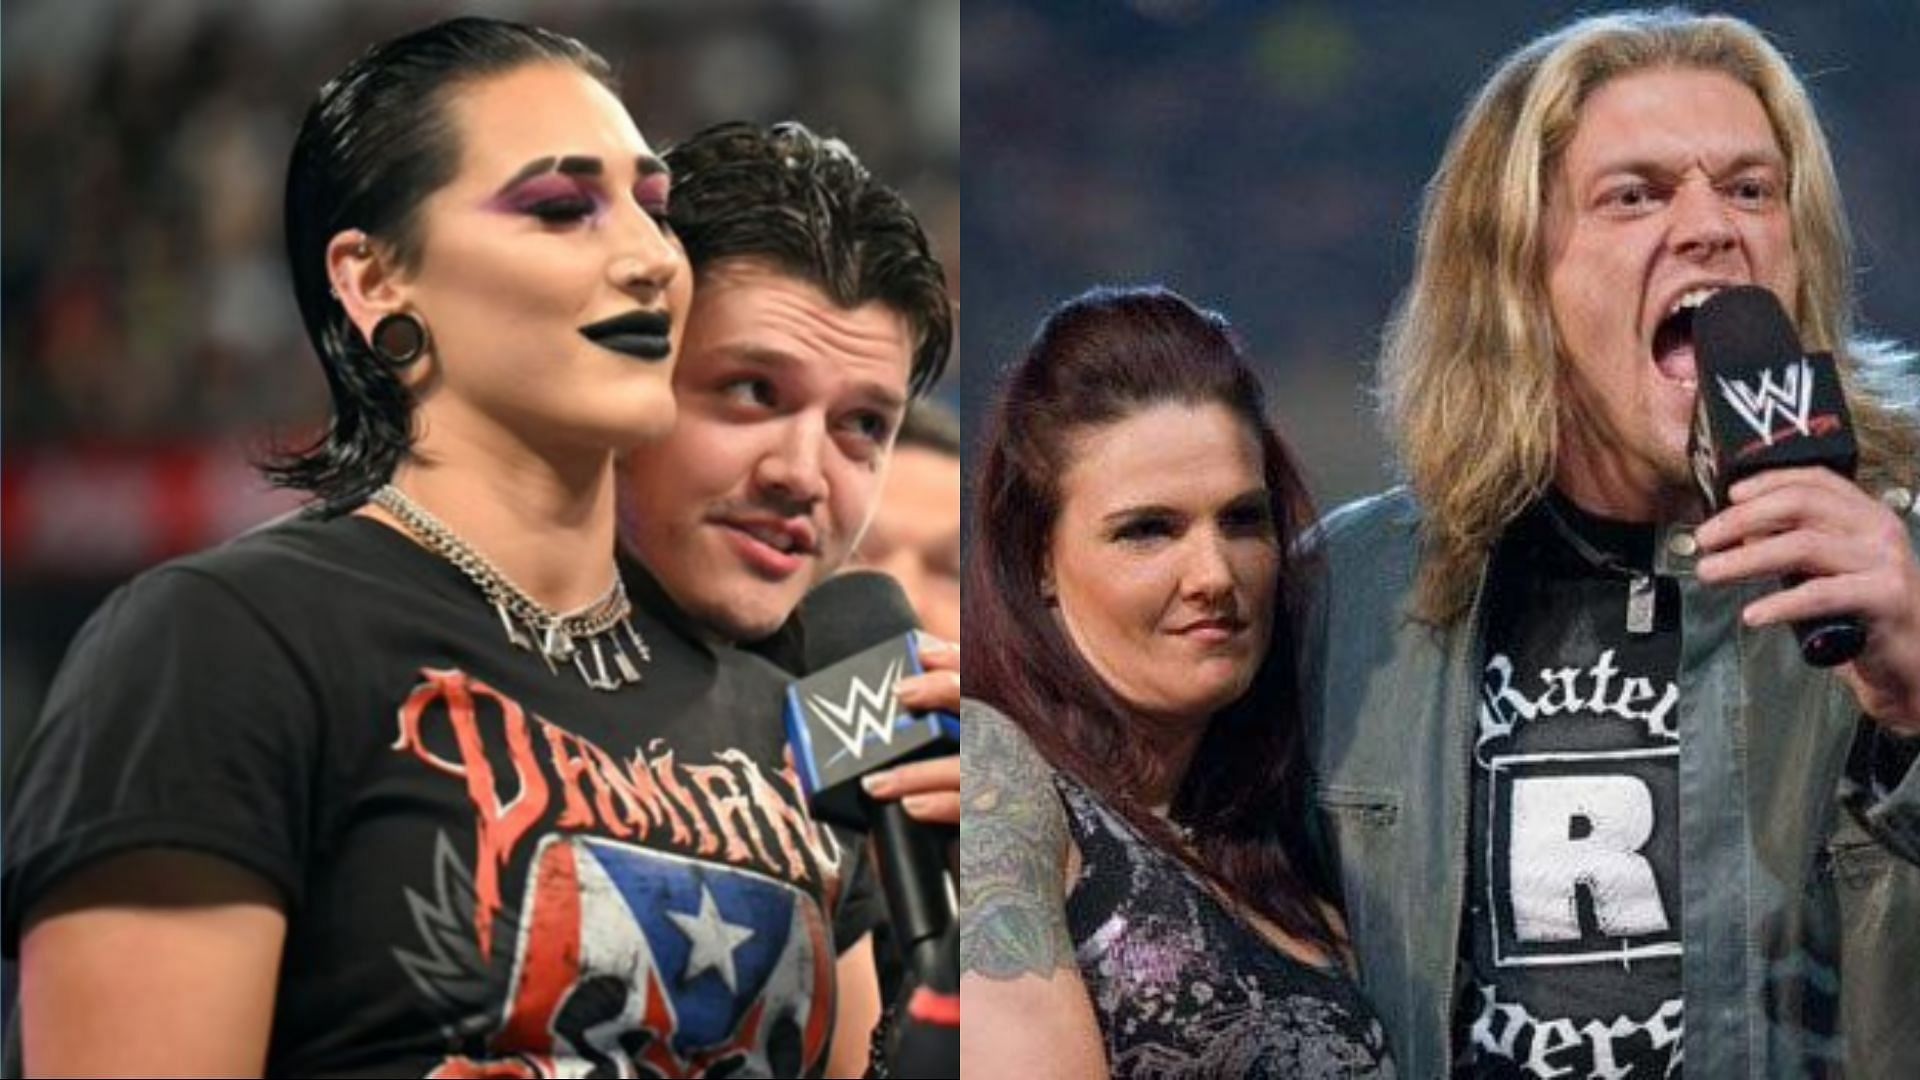 WWE Hall of Famers Edge and Lita were once a couple both on and off-screen.